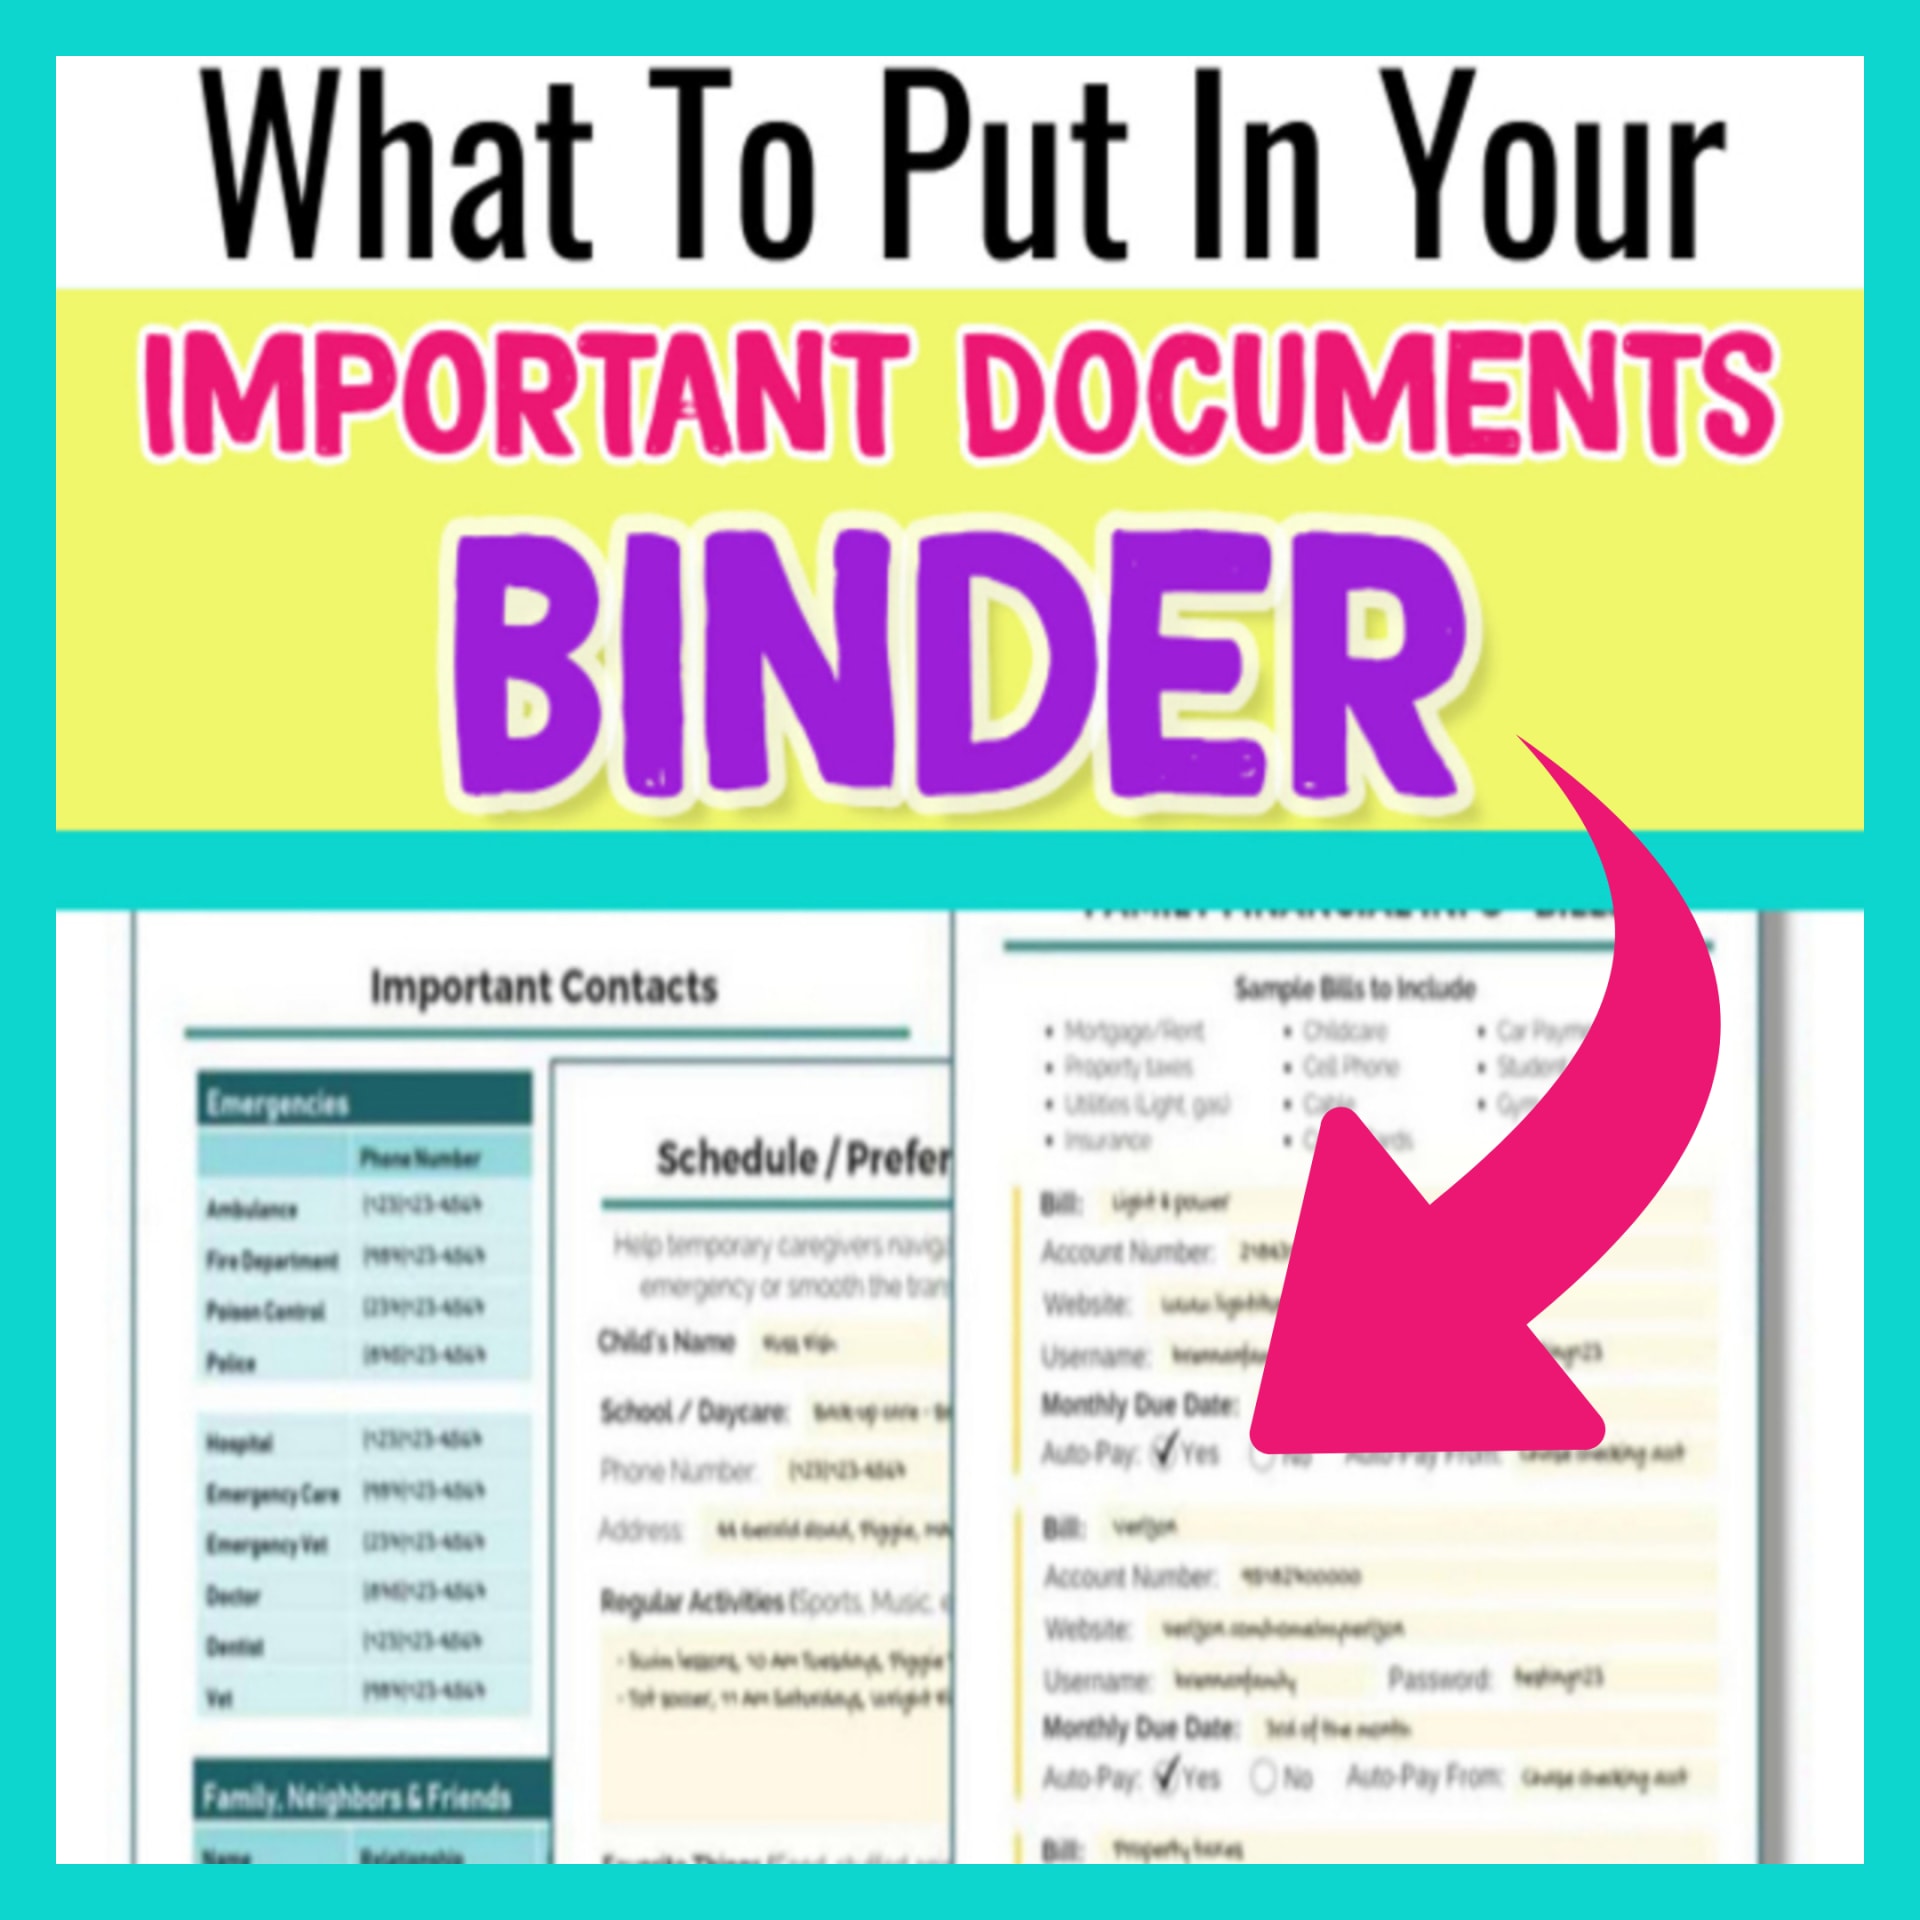 Important Documents Binder Ideas for Organizing a Simple Important Documents Finder and Family Emergency Binder.  Simple File Organization Tips for Emergency Kits and In Case of Emergency Binders for Families